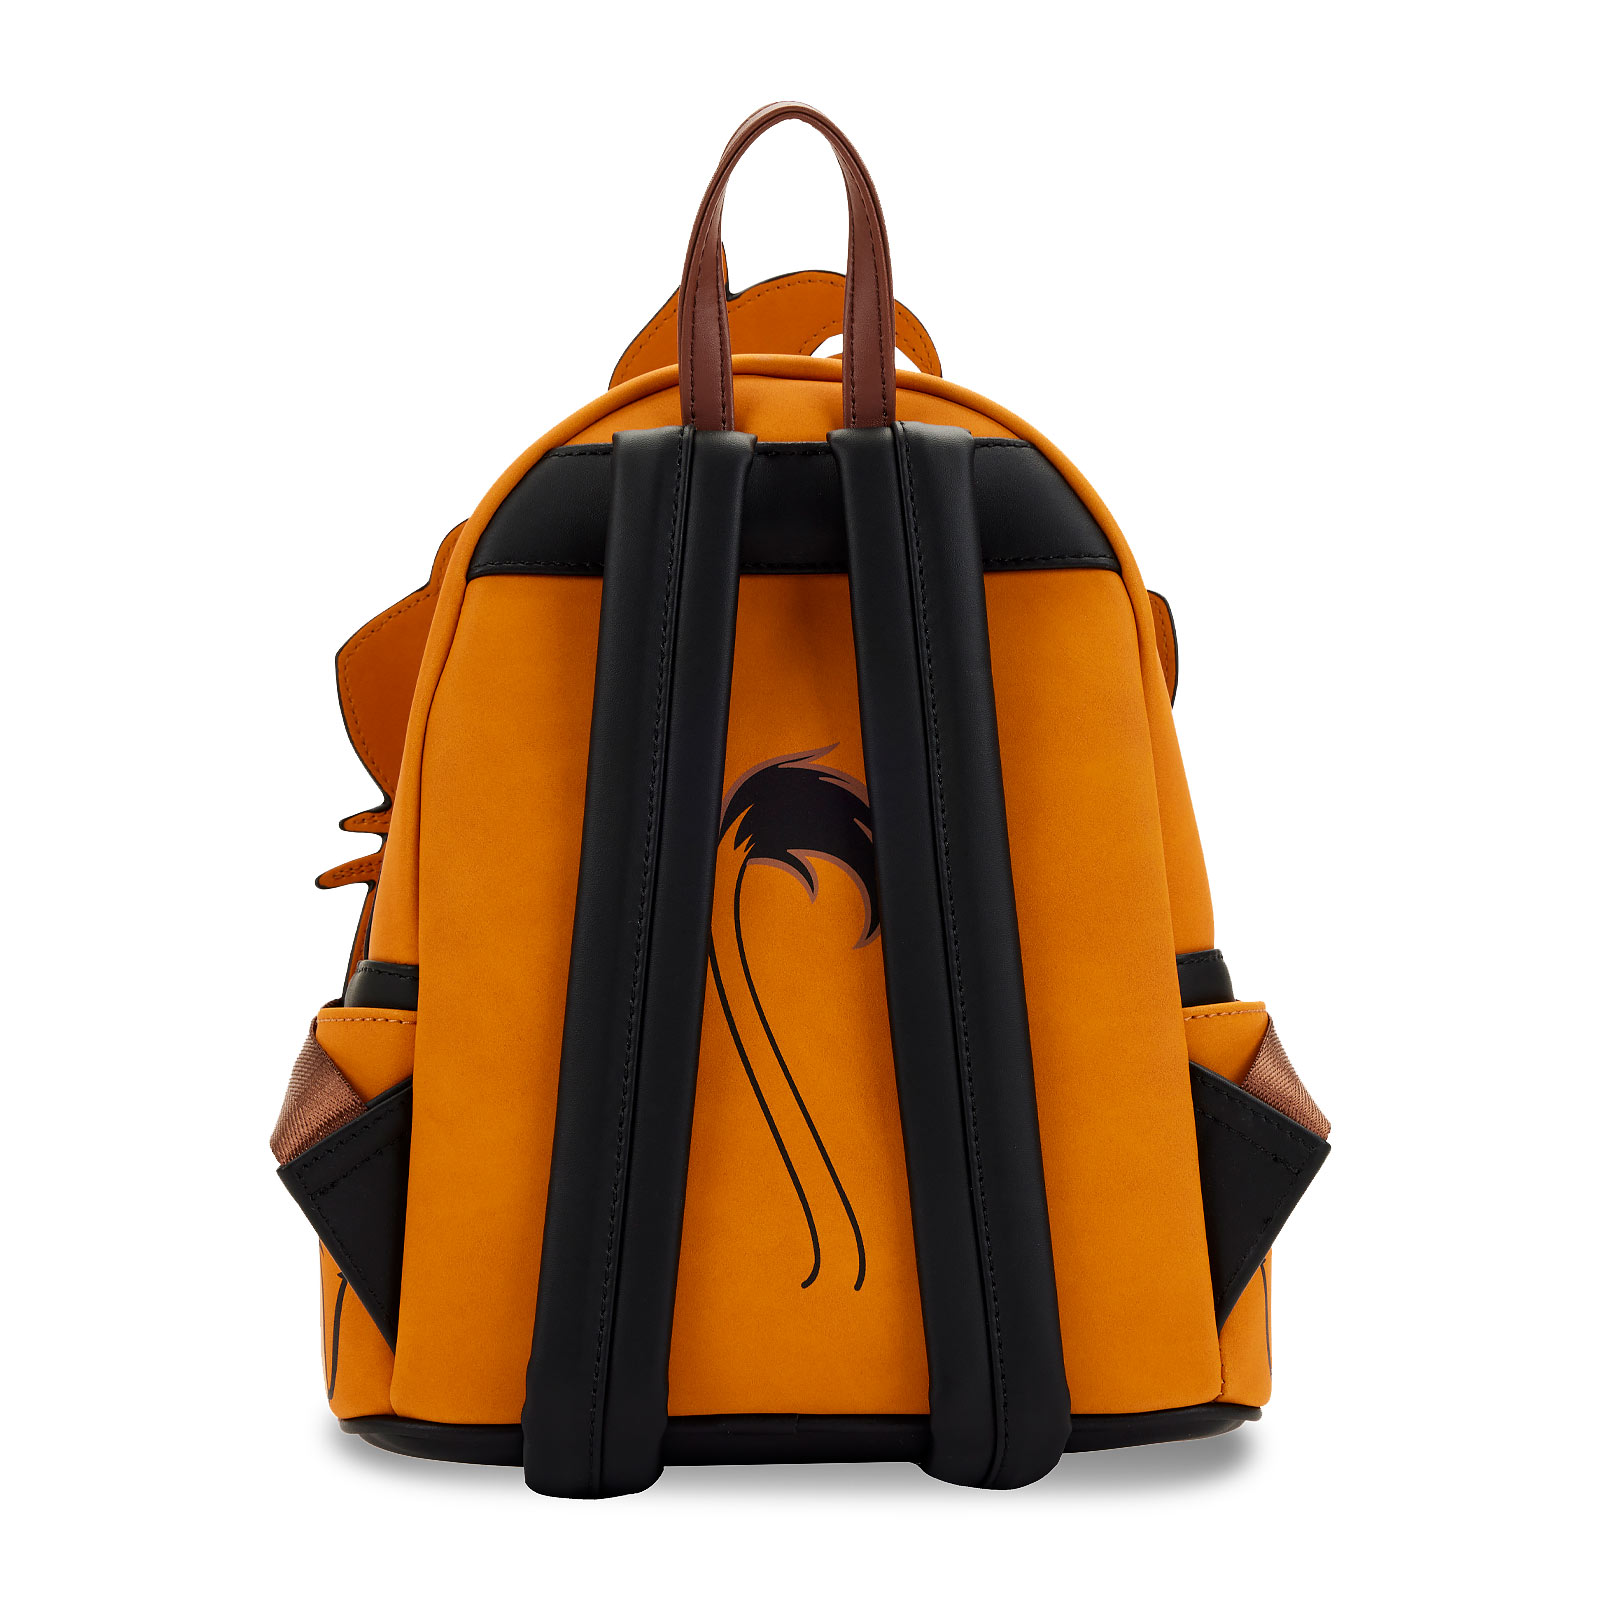 The Lion King - Scar Mini Backpack